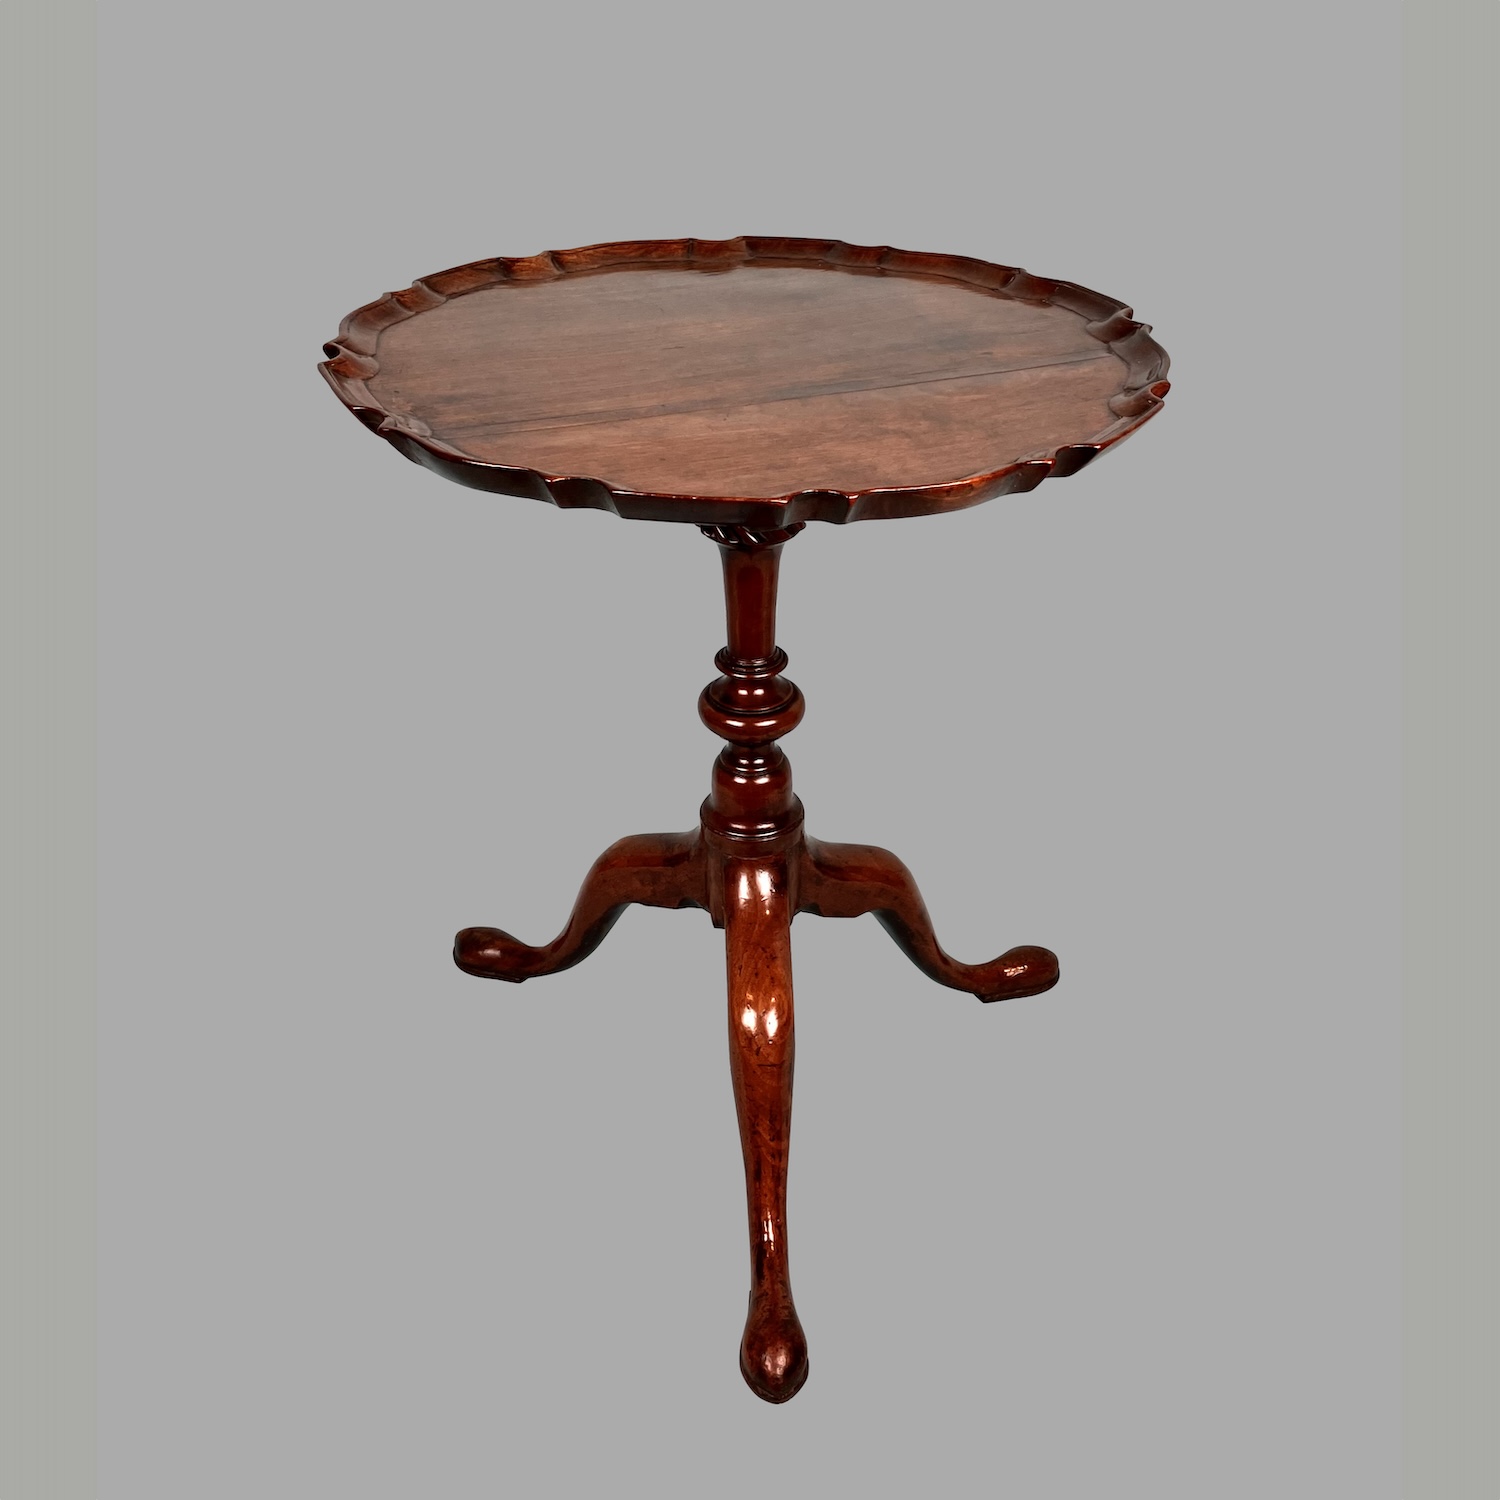 english-mahogany-18th-century-chippendale-pie-crust-table-small-size-c723-21